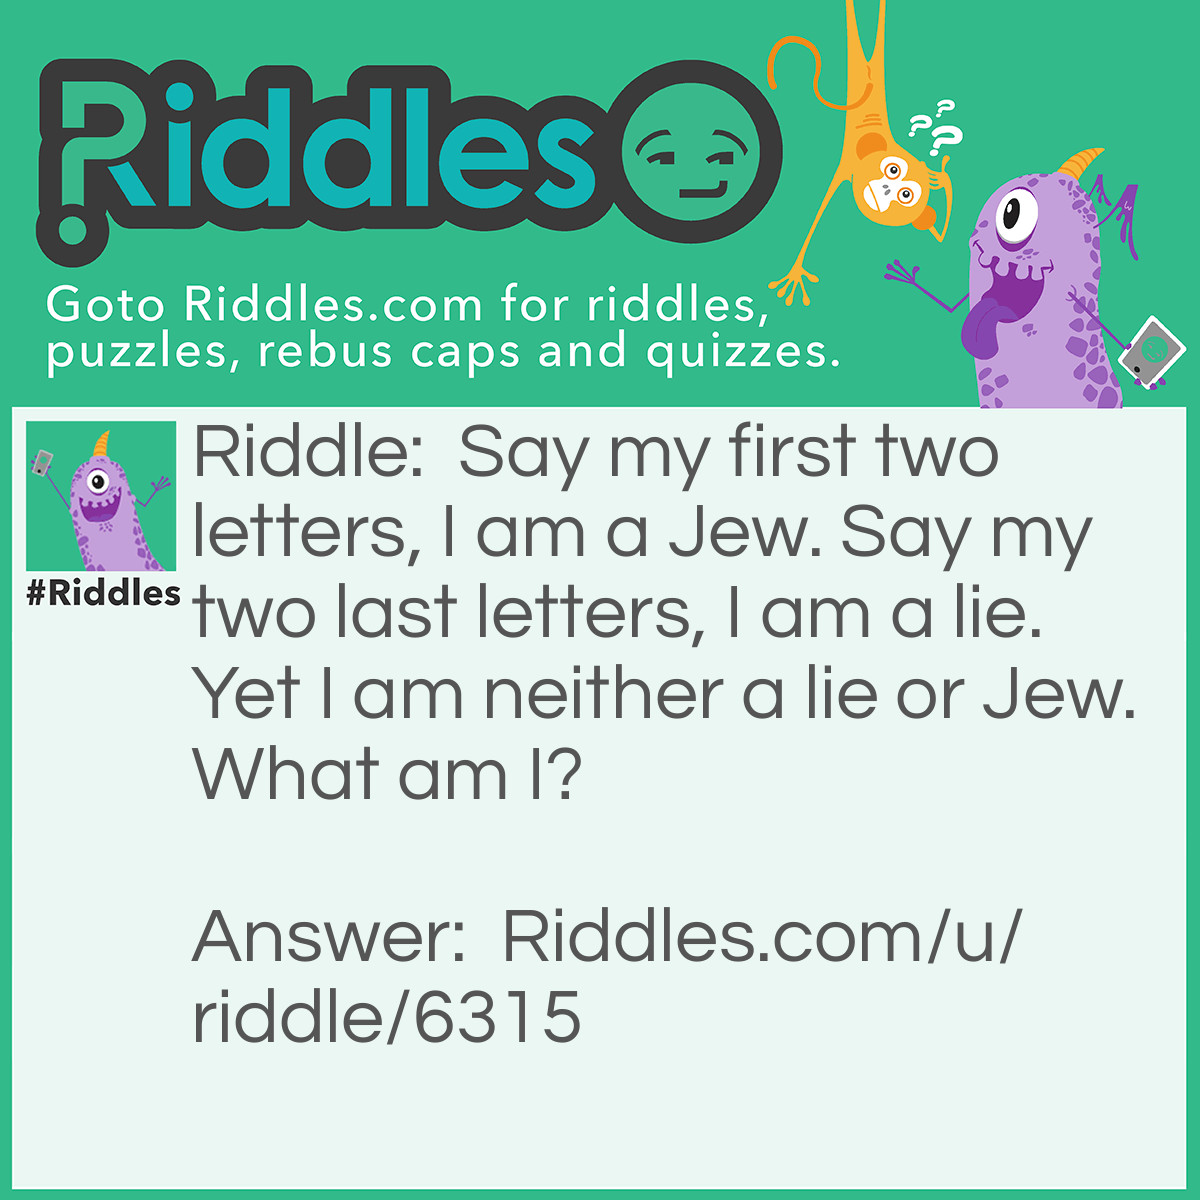 Riddle: Say my first two letters, I am a Jew. Say my two last letters, I am a lie. Yet I am neither a lie or Jew. What am I? Answer: July.